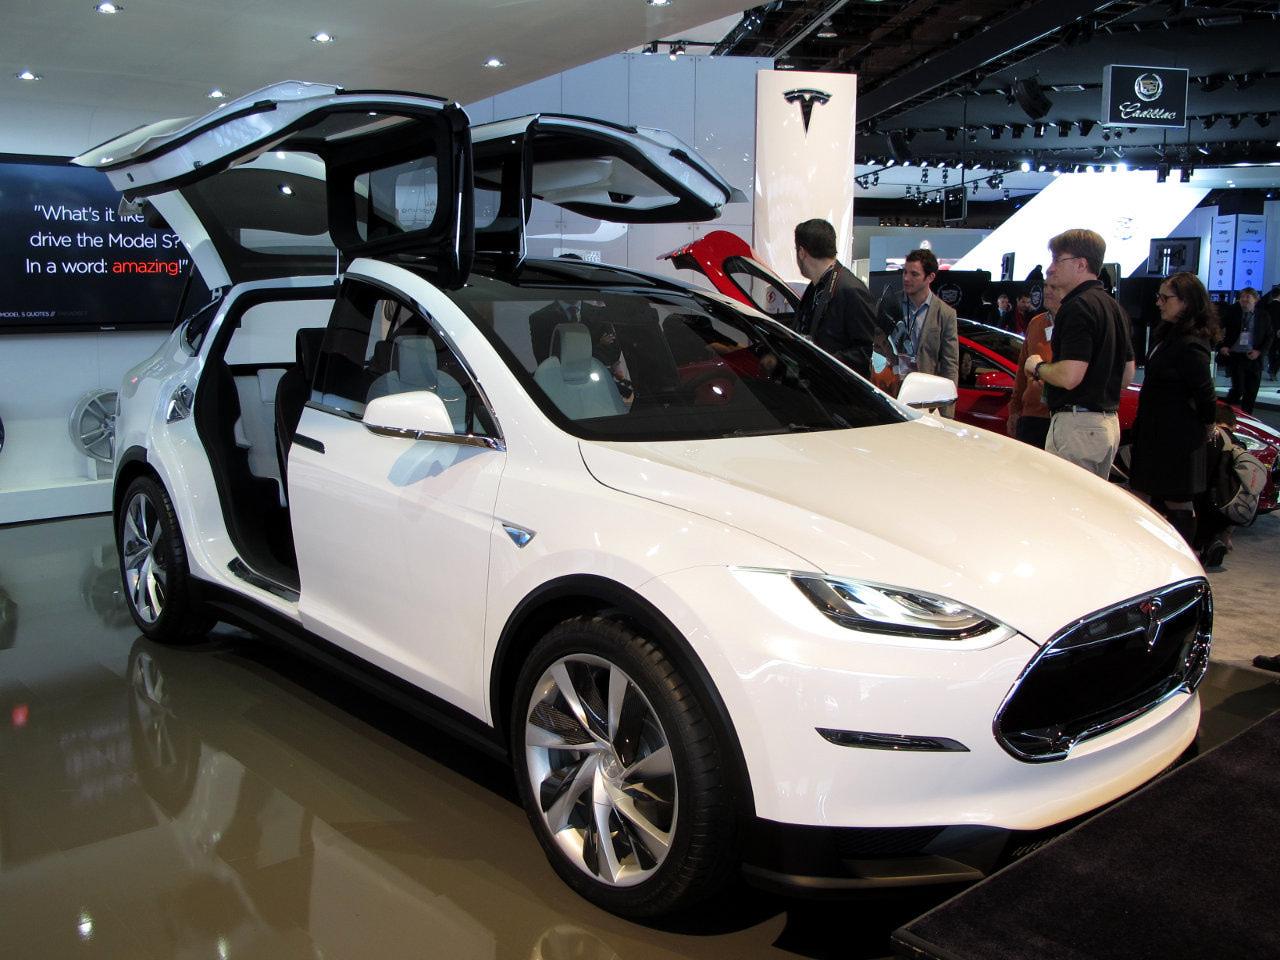 Tesla Model X gives a glimpse into the future – North Star News